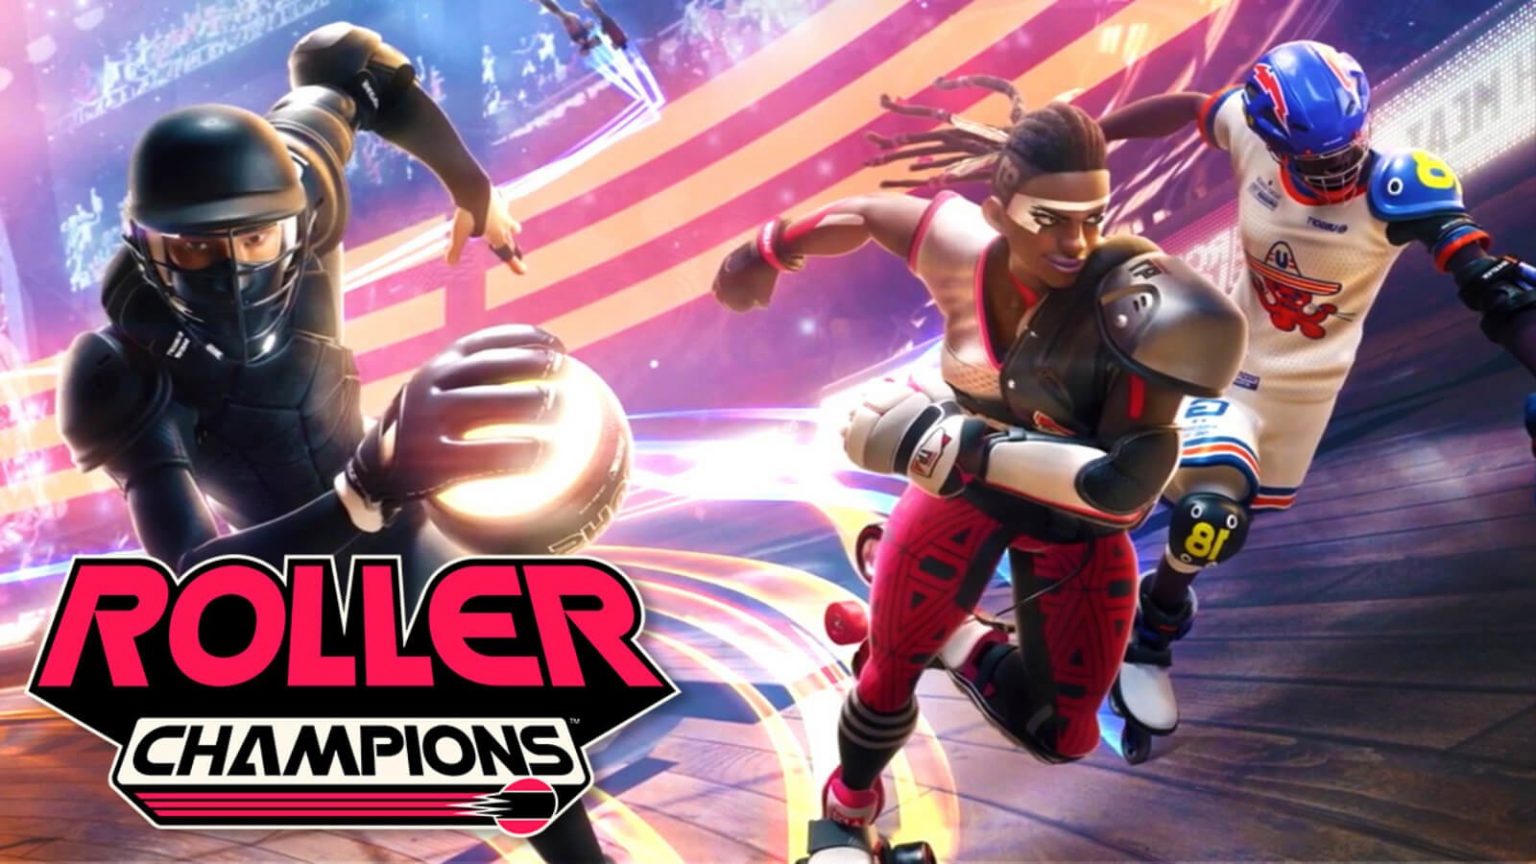 Roller Champions PC Version Full Game Free Download 1536x864 1